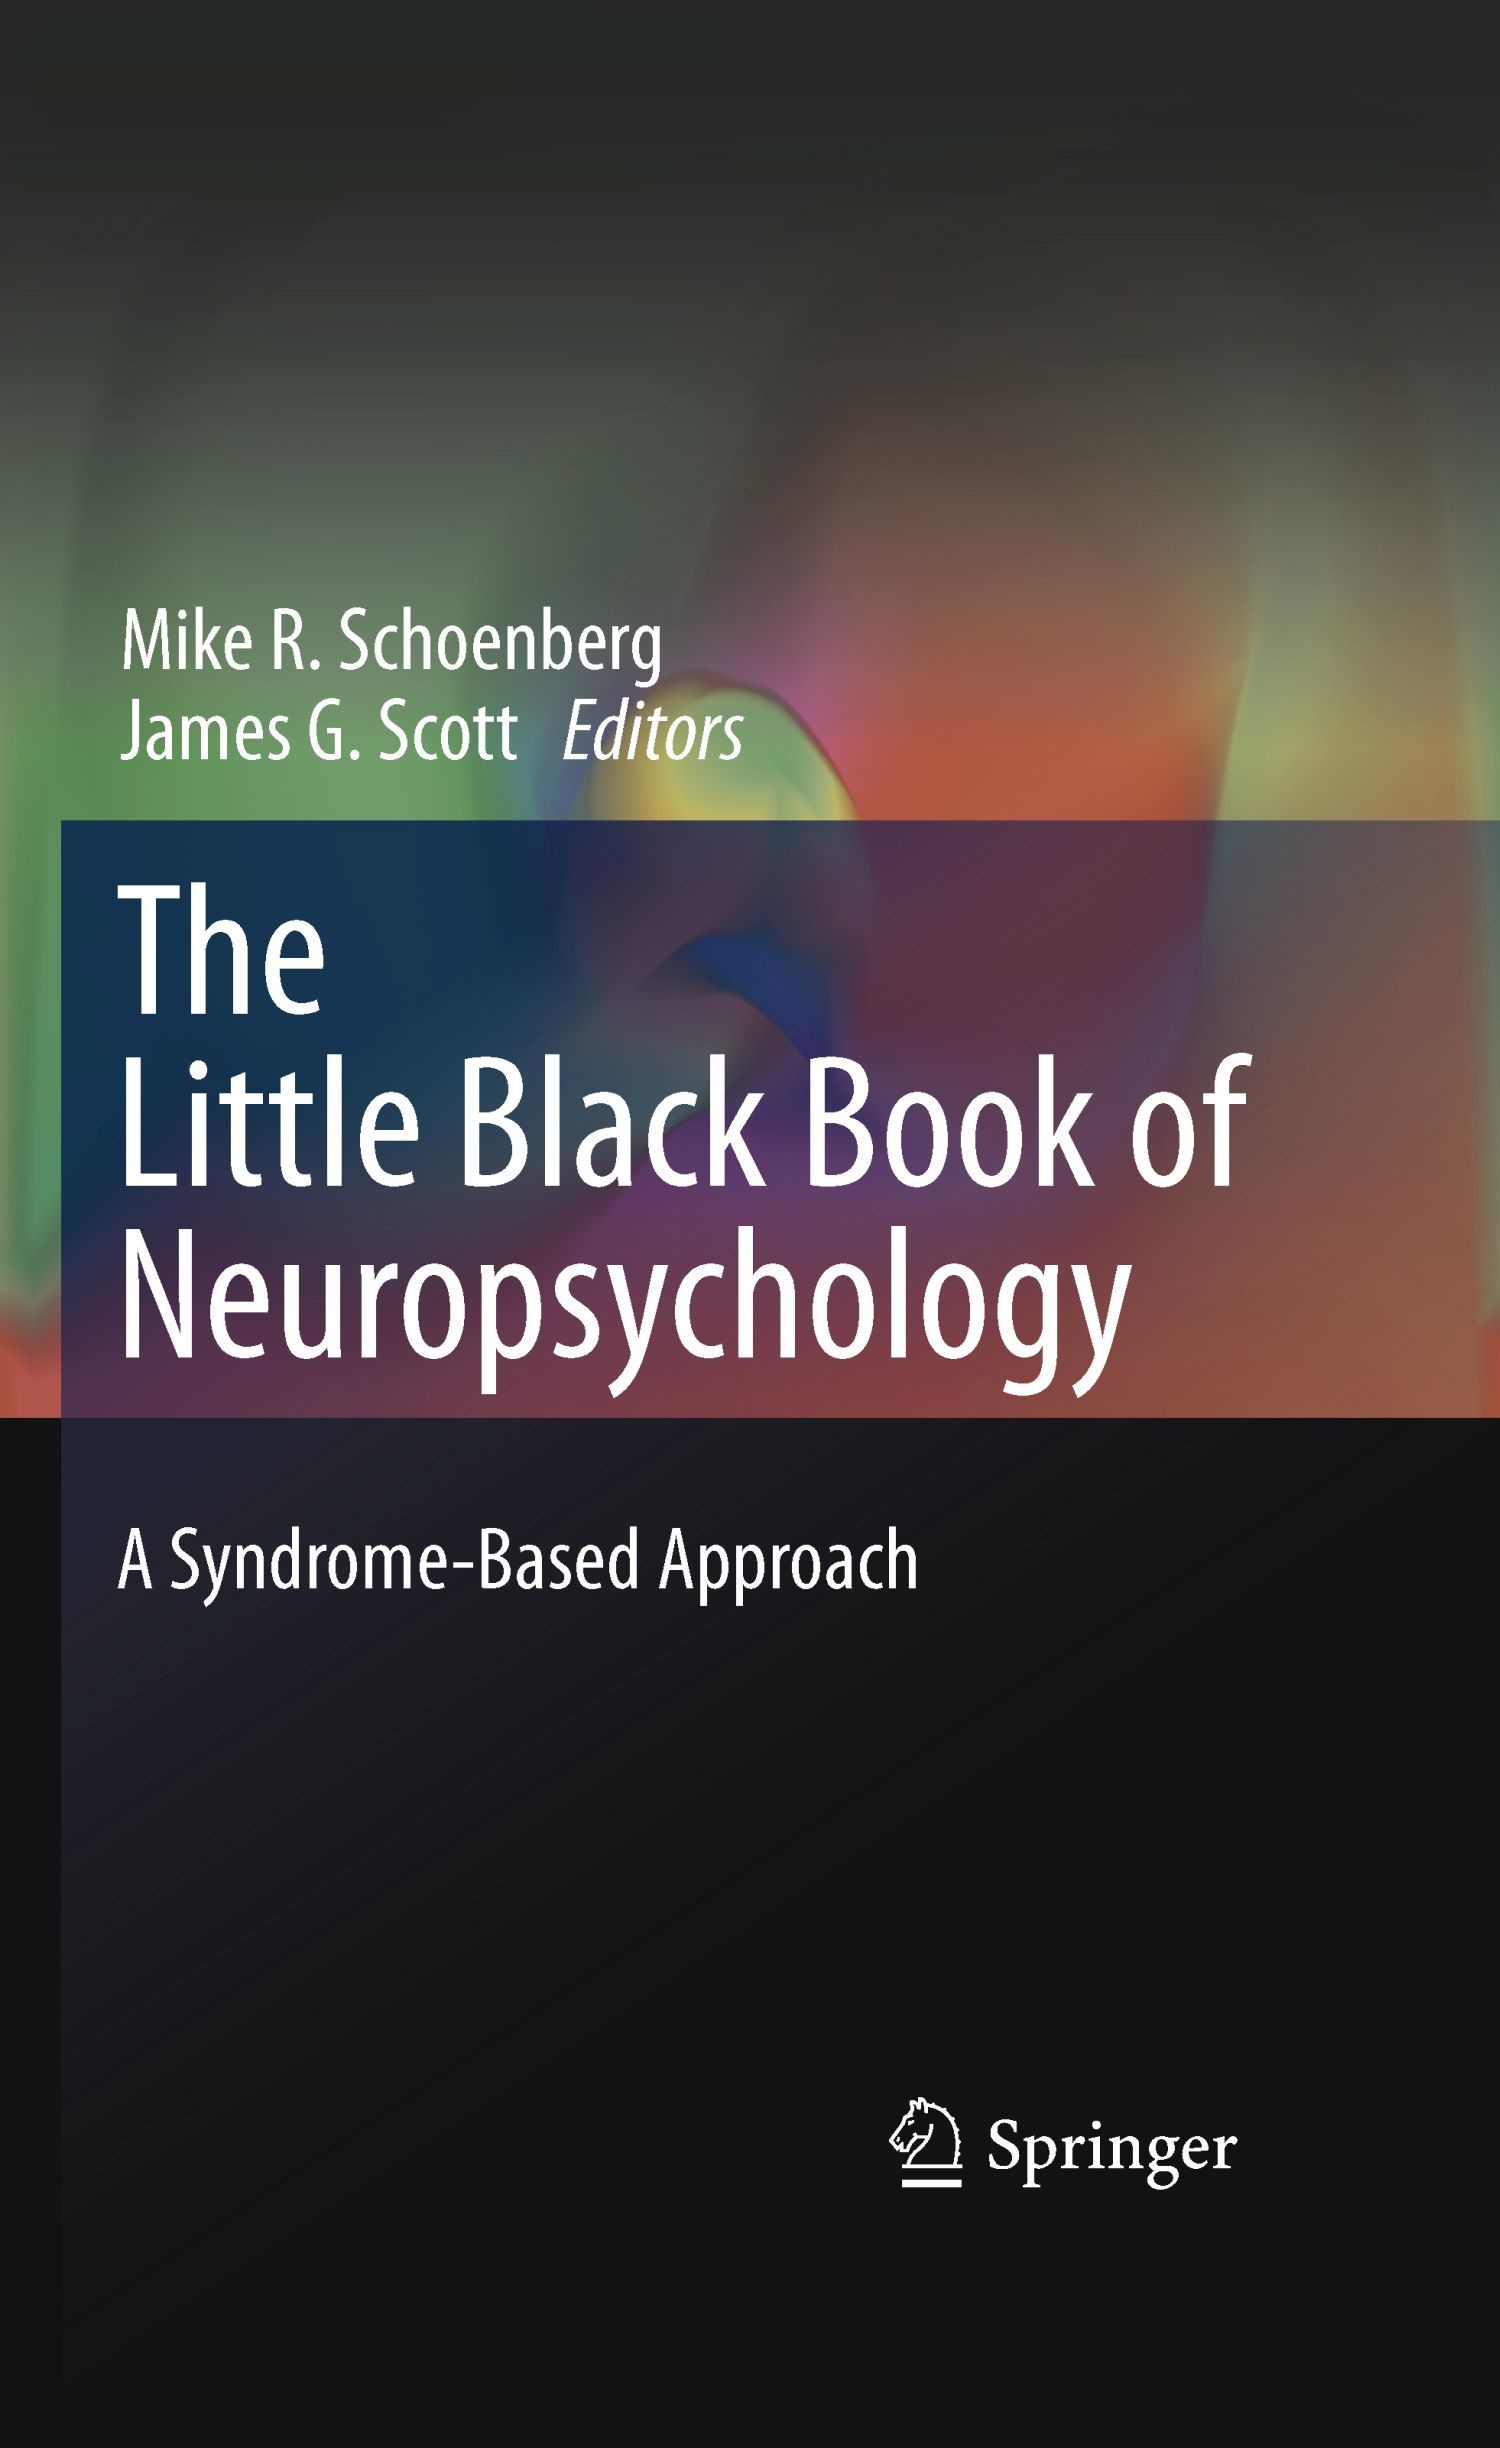 Cover The Little Black Book of Neuropsychology